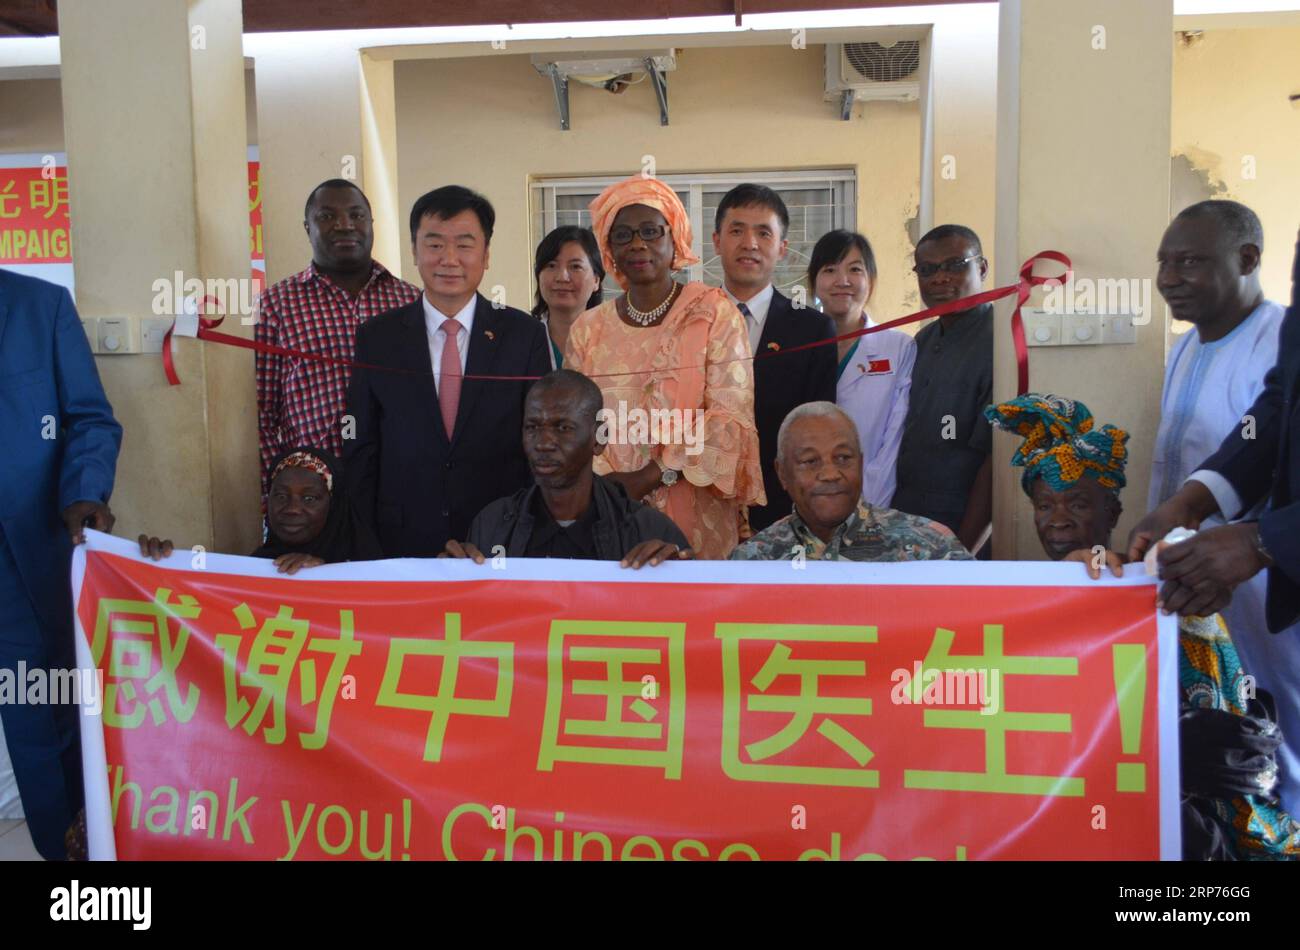 (190129) -- BANJUL, Jan. 29, 2019 () -- Gambian patients and their relatives pose for photos with a banner expressing their gratitude for the Chinese doctors in Banjul, the Gambia, Jan. 23, 2019. The Gambia, sitting at the western coast of the African continent, has plenty of sunshine and comparatively high prevalence of cataract. Many cataract patients suffer from blurred vision, even blindness, as the country lacks medical expertise and equipment. Ten Chinese doctors volunteered to provide free treatment to patients in this country under China s medical aid program Bright Journey. They flew Stock Photo